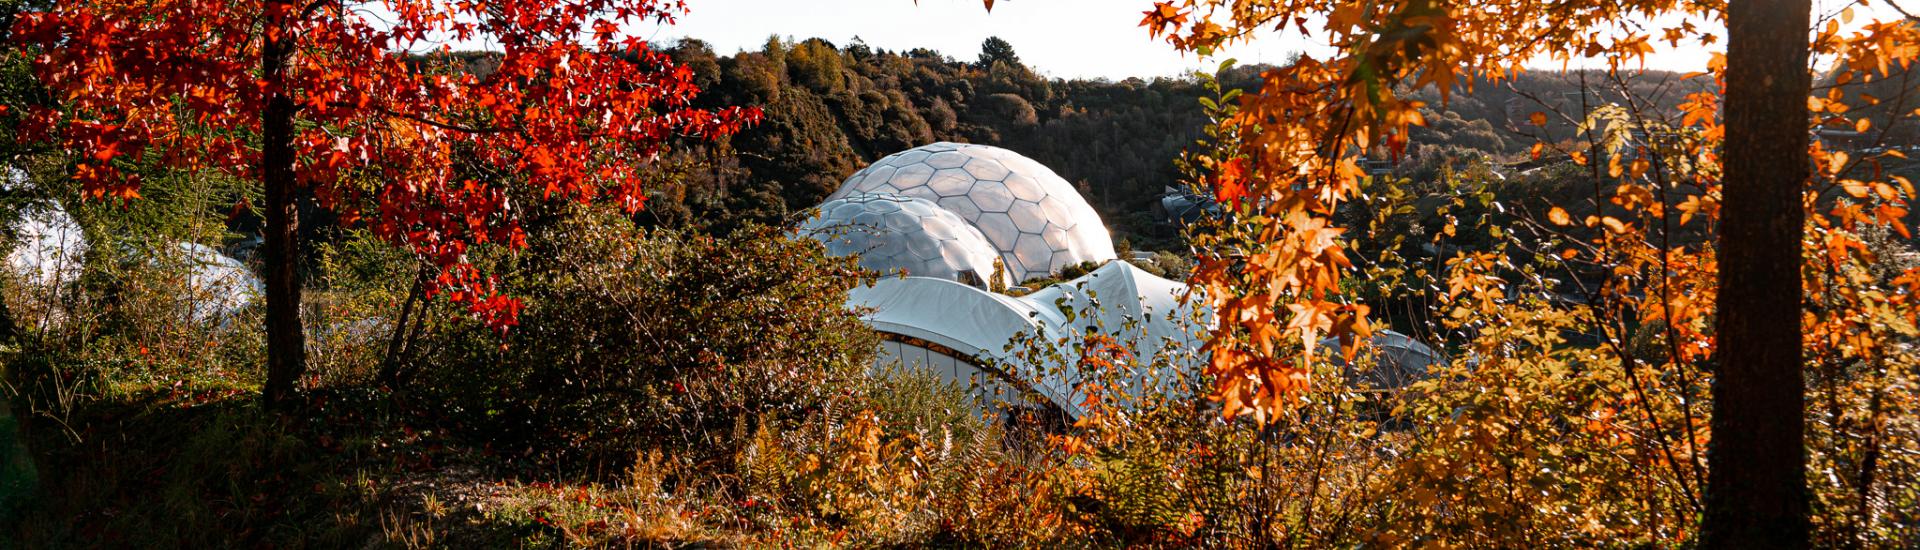 Wide shot of the Biomes in between red and orange Autumn trees